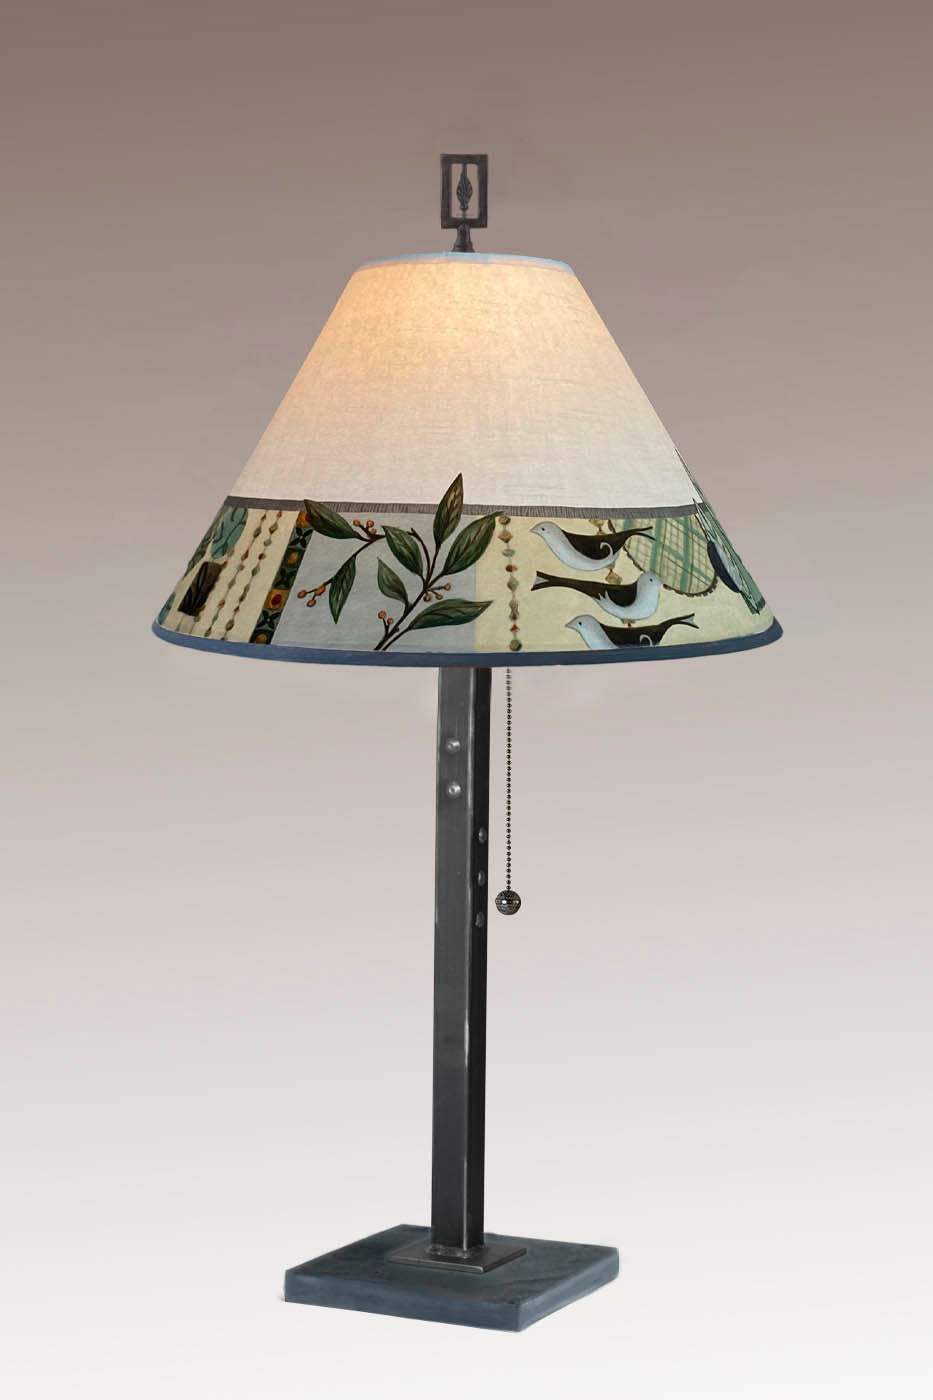 Janna Ugone & Co Table Lamp Steel Table Lamp with Medium Conical Shade in New Capri Opal